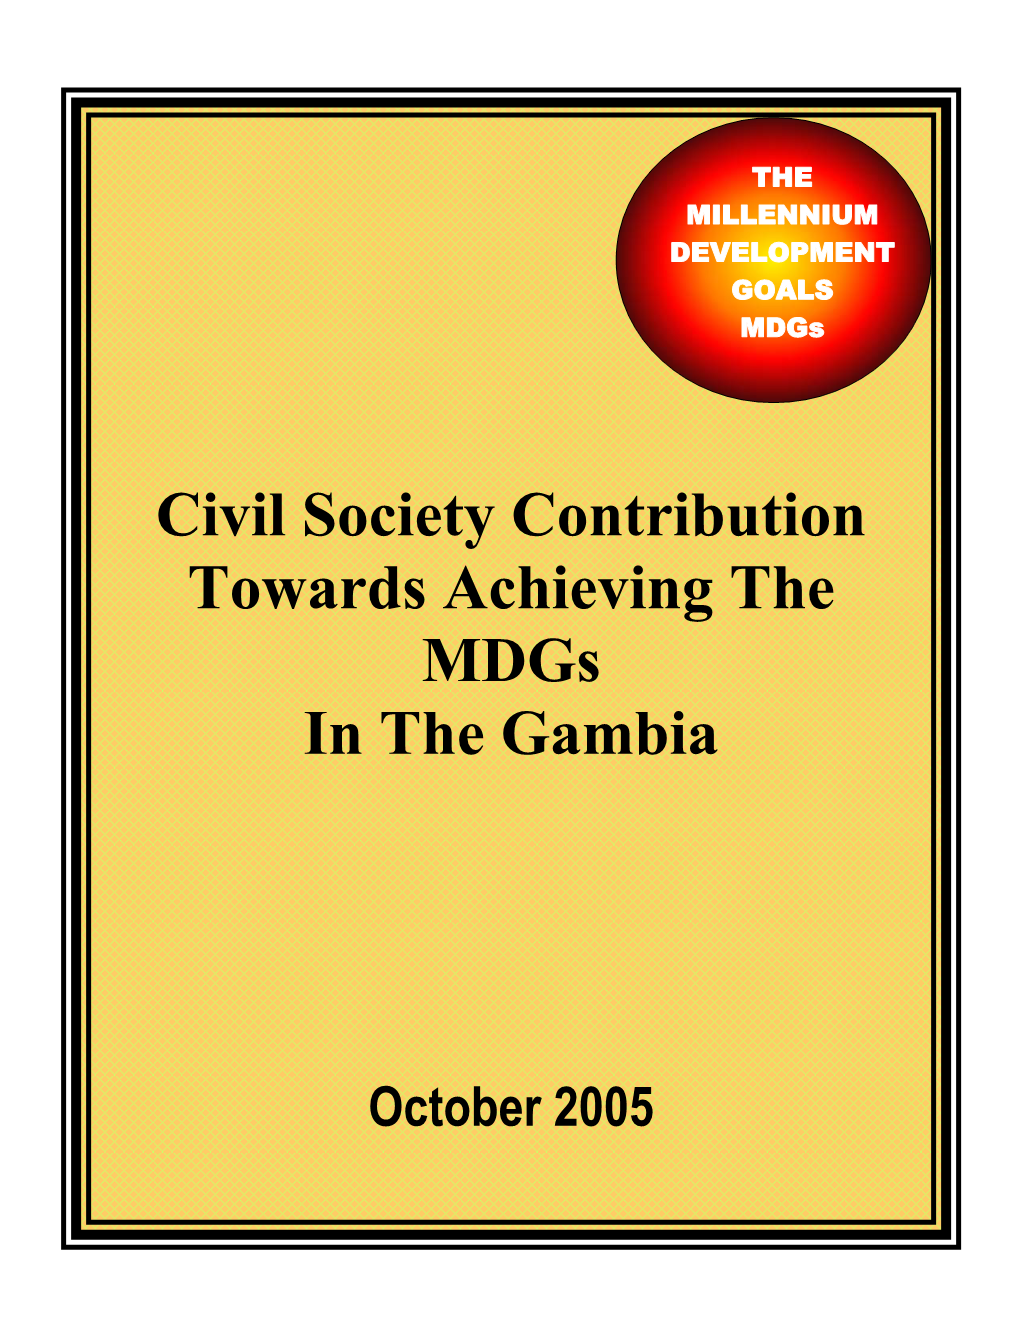 Civil Society Contribution Towards Achieving the Mdgs in the Gambia